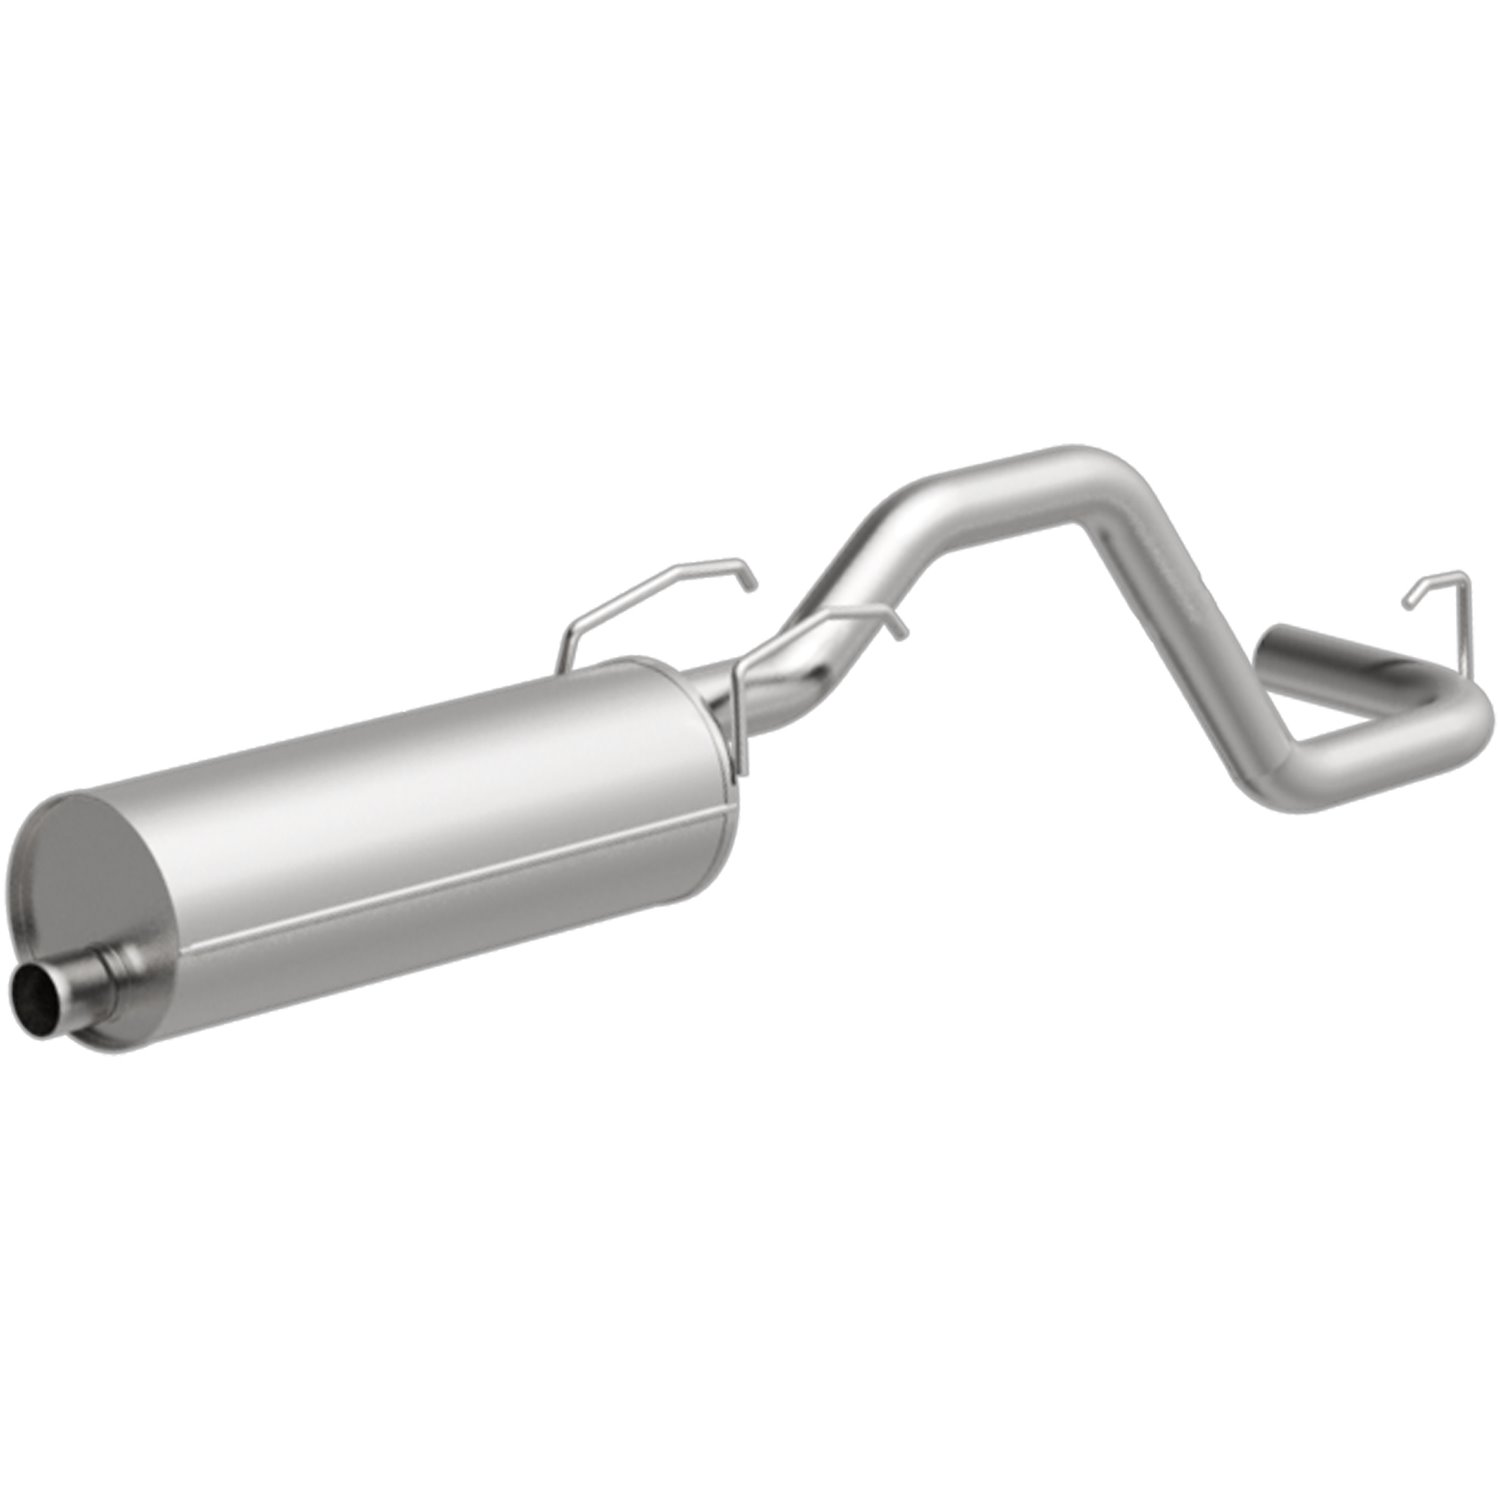 Direct-Fit Exhaust Muffler, 1995-2004 Toyota Tacoma 2.7L